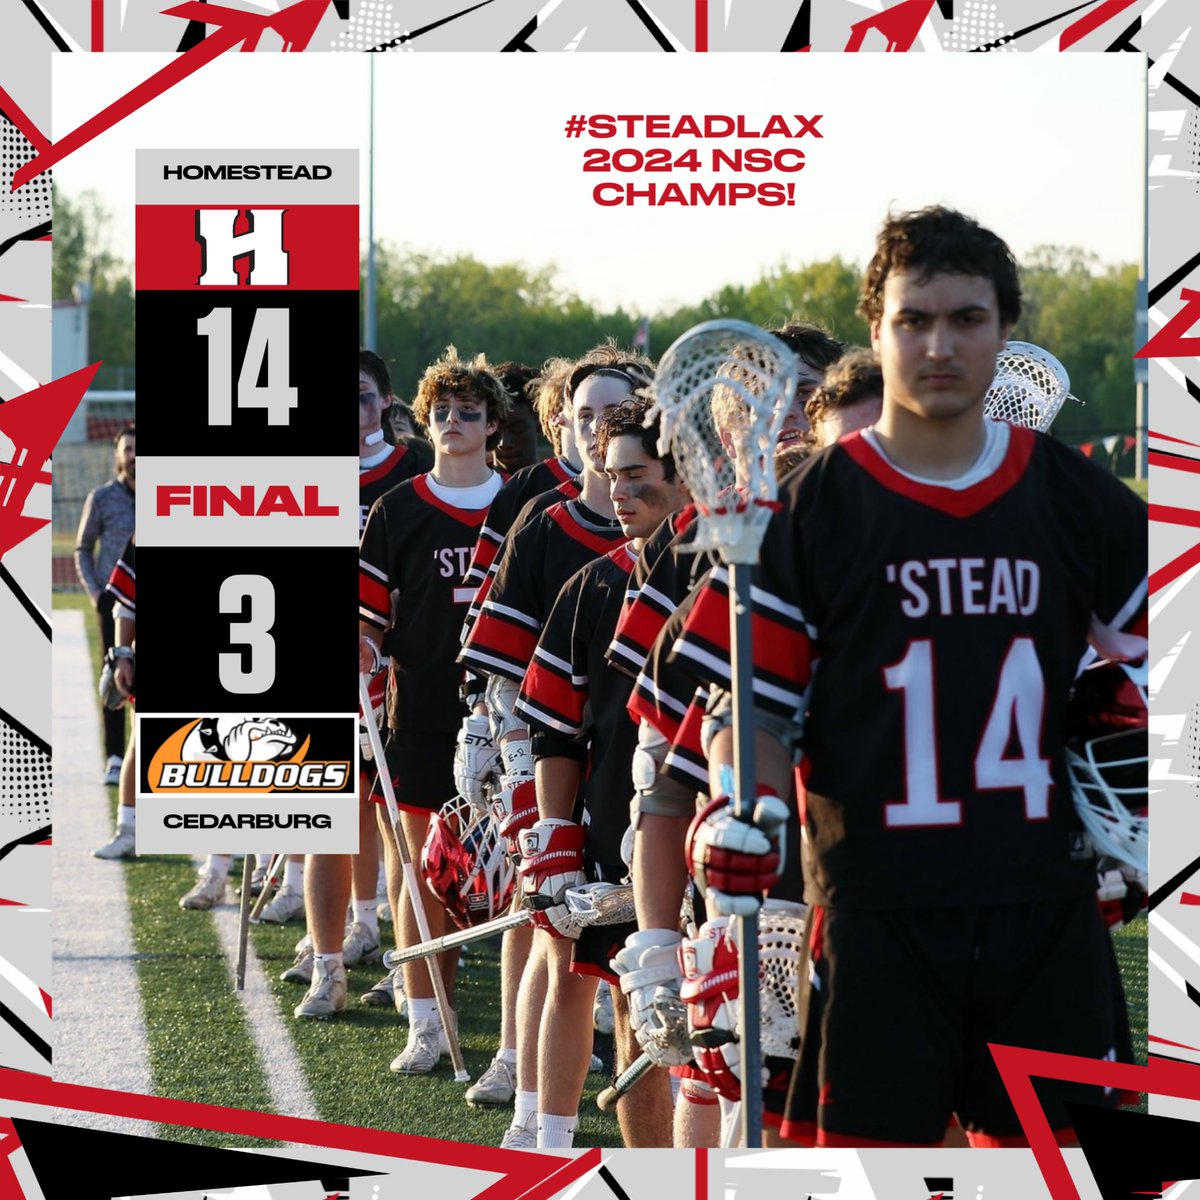 Recap from last nite: JV & Varsity win at Cedarburg. JV wraps up a very successful season, Varsity wins the inaugural season of North Shore Conference Lacrosse going 6-0. Back to work tonite on the practice field, playoffs next week. Congrats to all the Homestead lax-ers!